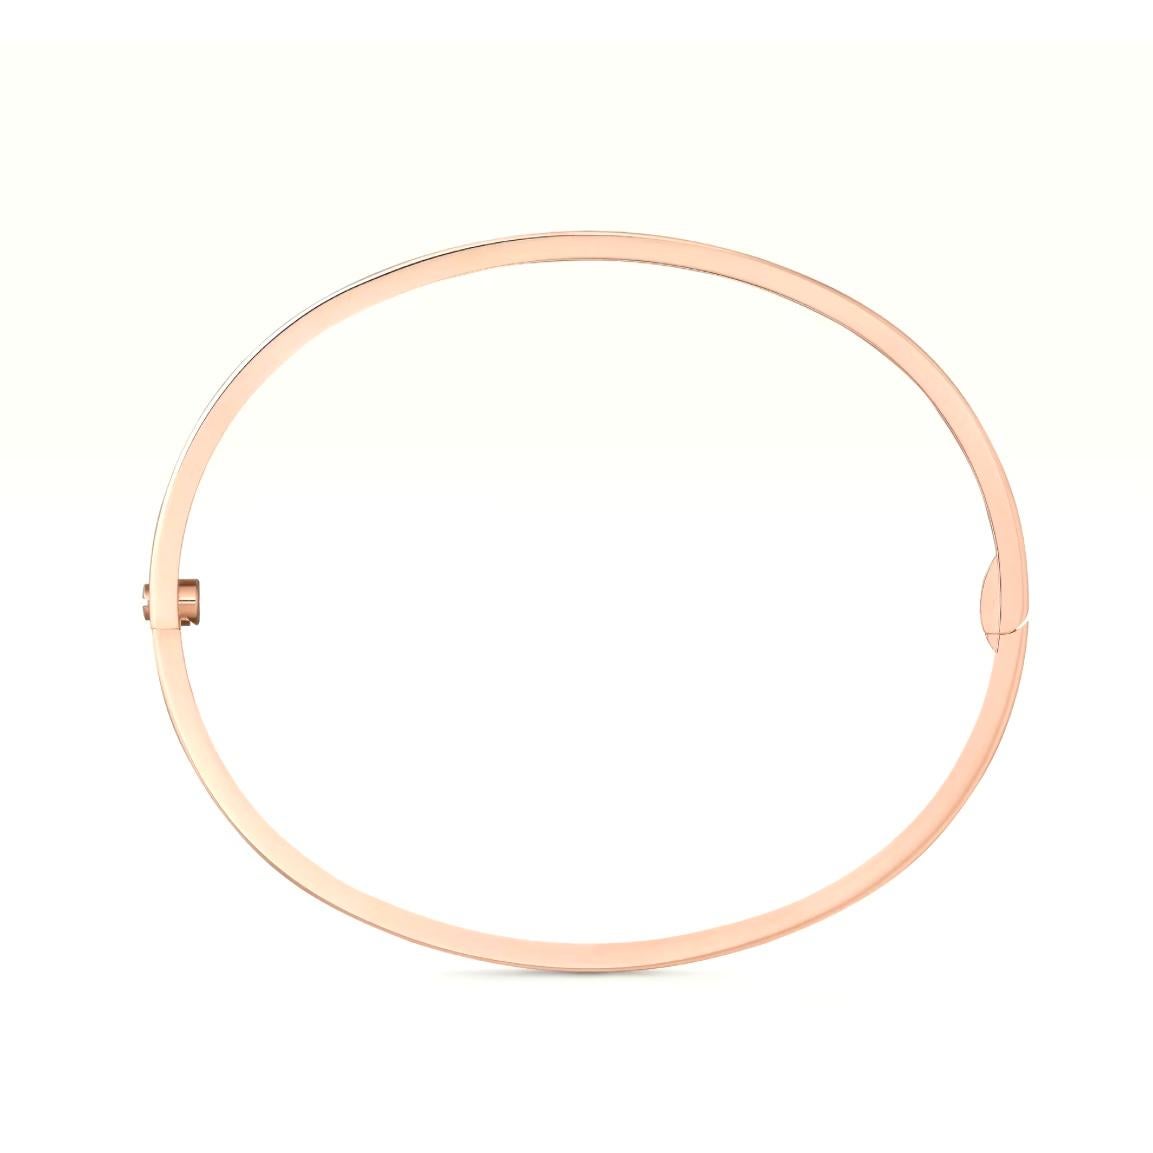 Designer: Cartier
Collection:  Love
Style: Bangle (Small Model)
Metal: Rose Gold 
Metal Purity: 18K 
Stones: 6 Diamonds
Screw Style System: New Screw System 
Bracelet Size: 15 = 15 cm
Hallmarks: Cartier; Serial #, 750
Includes:  24 Months Brilliance